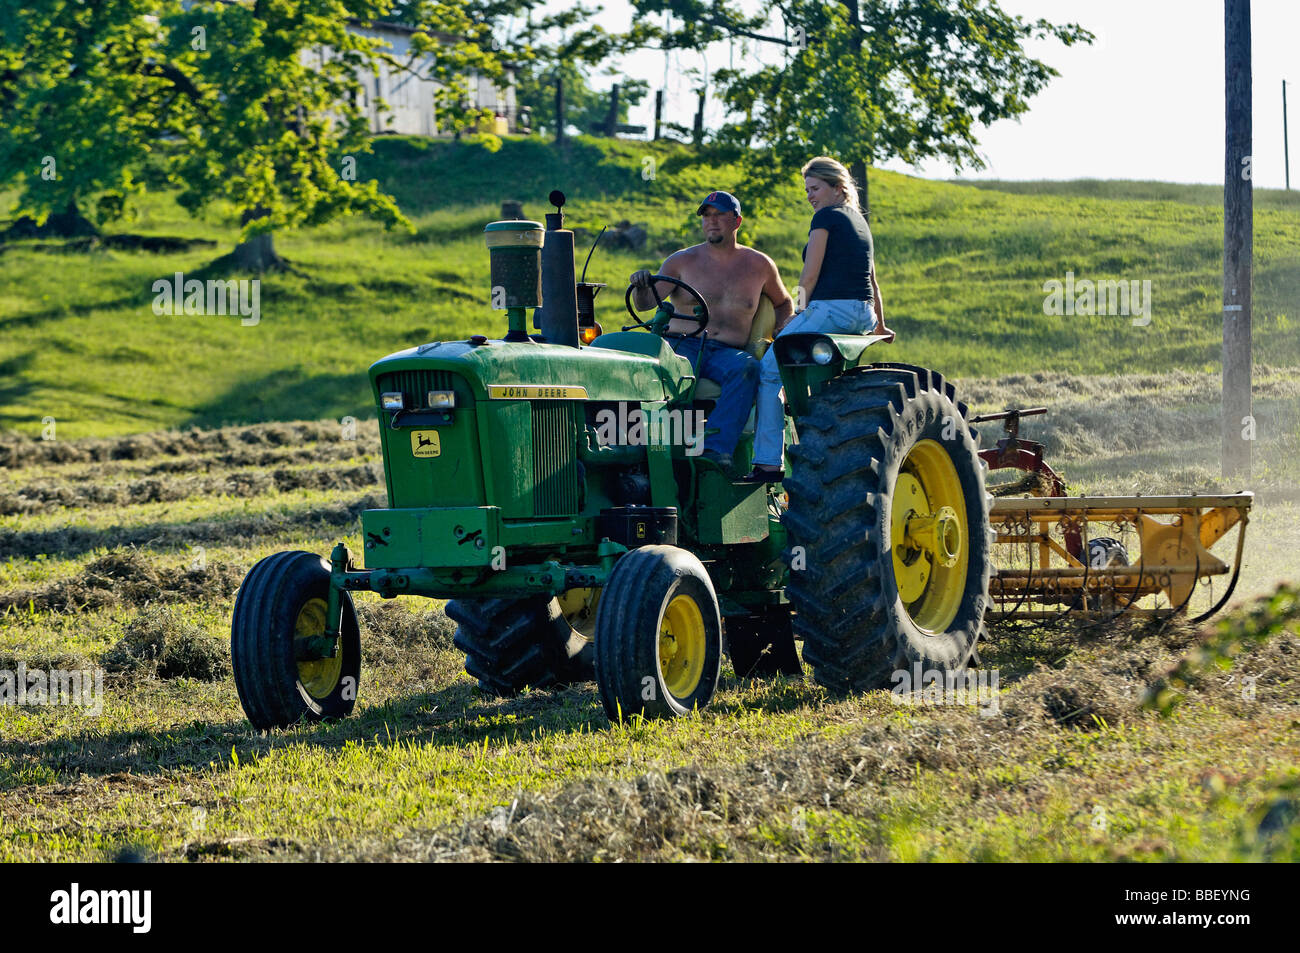 Farmer and his Wife on John Deere 3010 Diesel Tractor in Harrison County Indiana Stock Photo